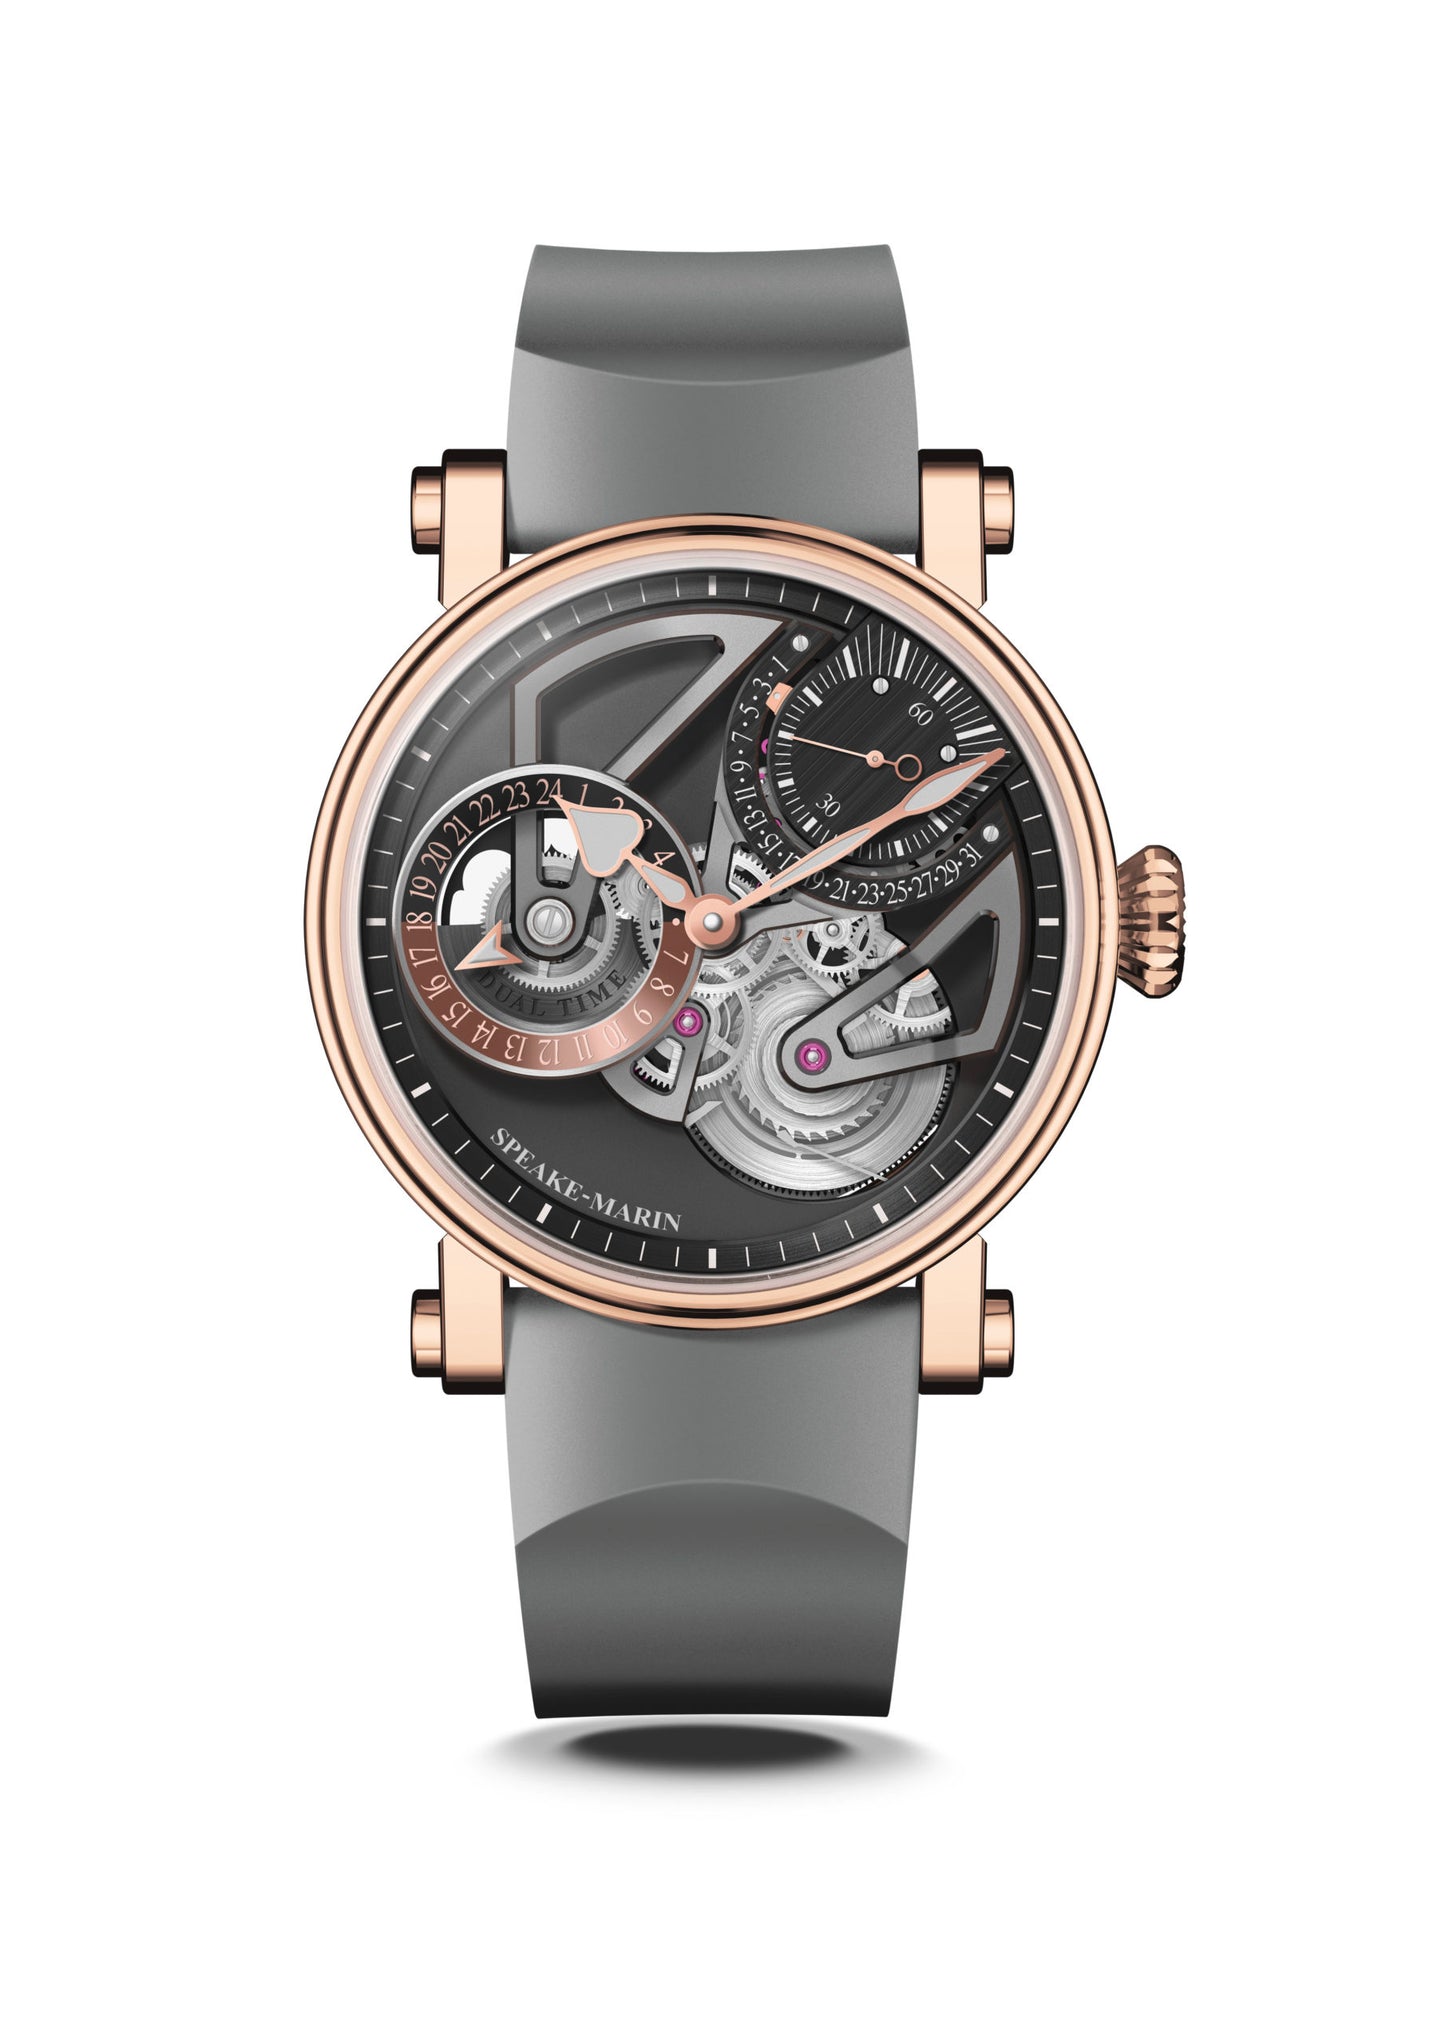 Speake-Marin Openworked Dual Time Red Gold 38mm (Special Order)